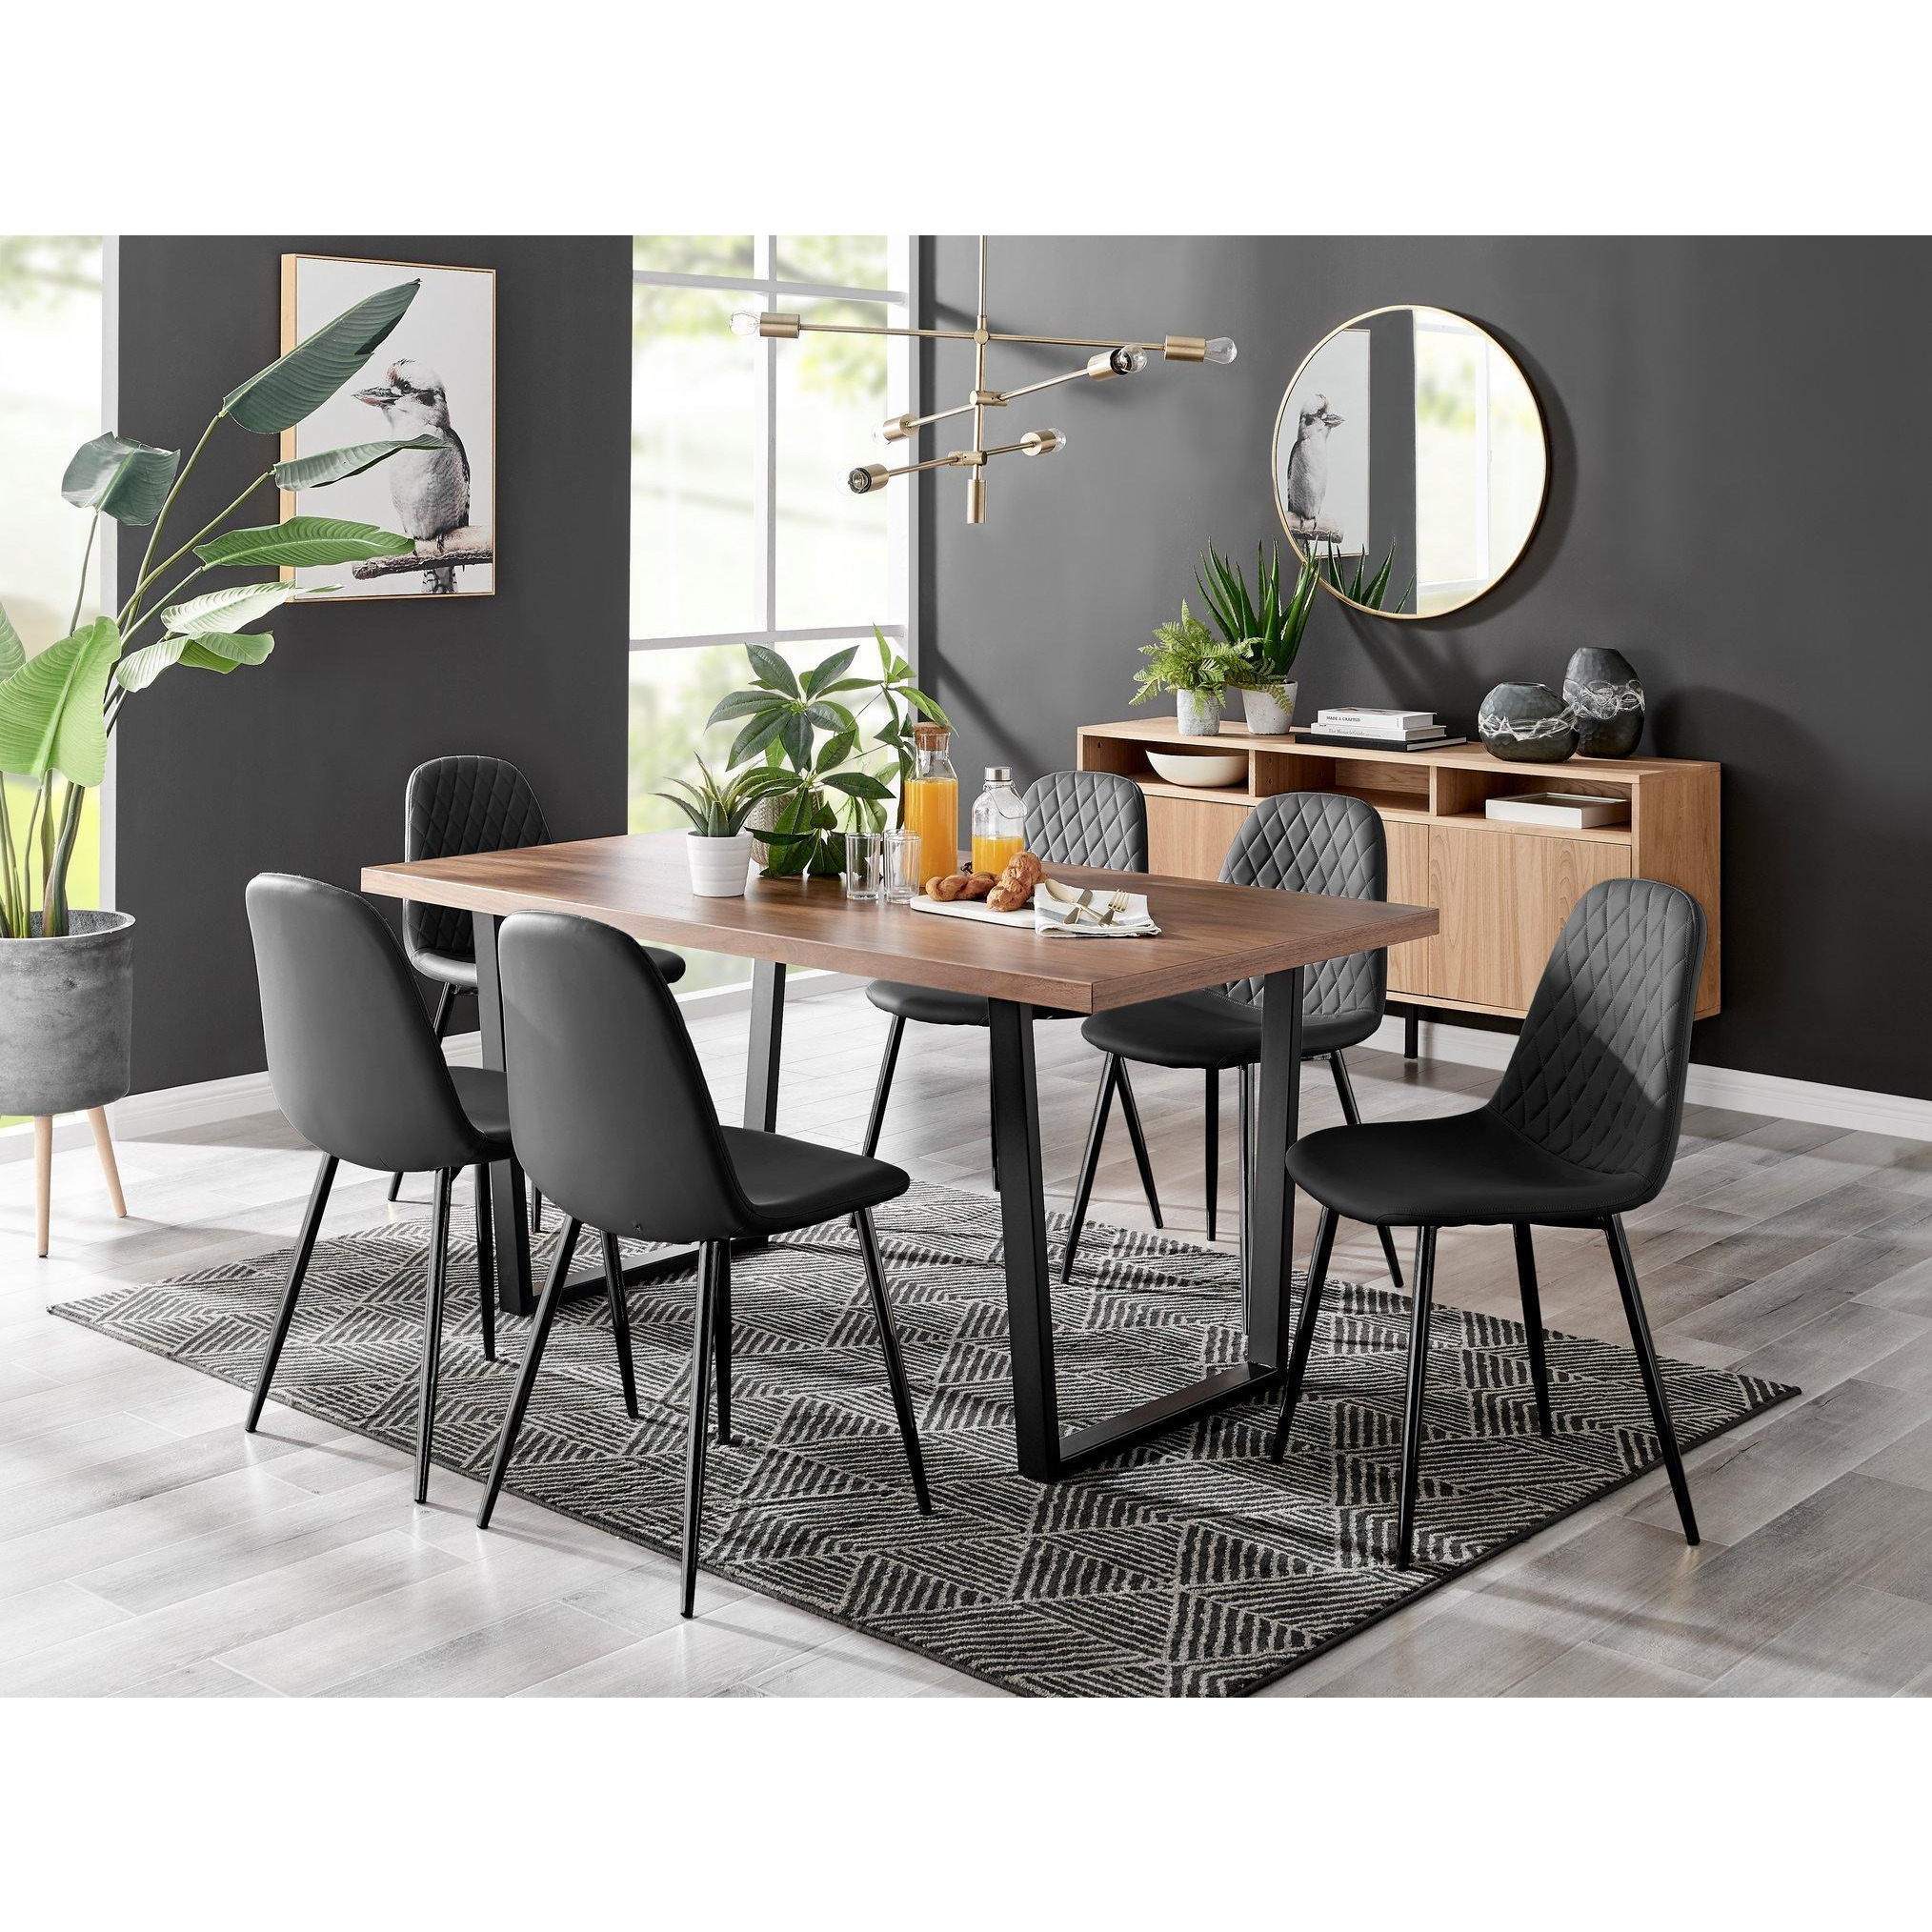 Kylo Large Brown Wood Effect Dining Table & 6 Corona Black Leg Feax Leather Chairs - image 1